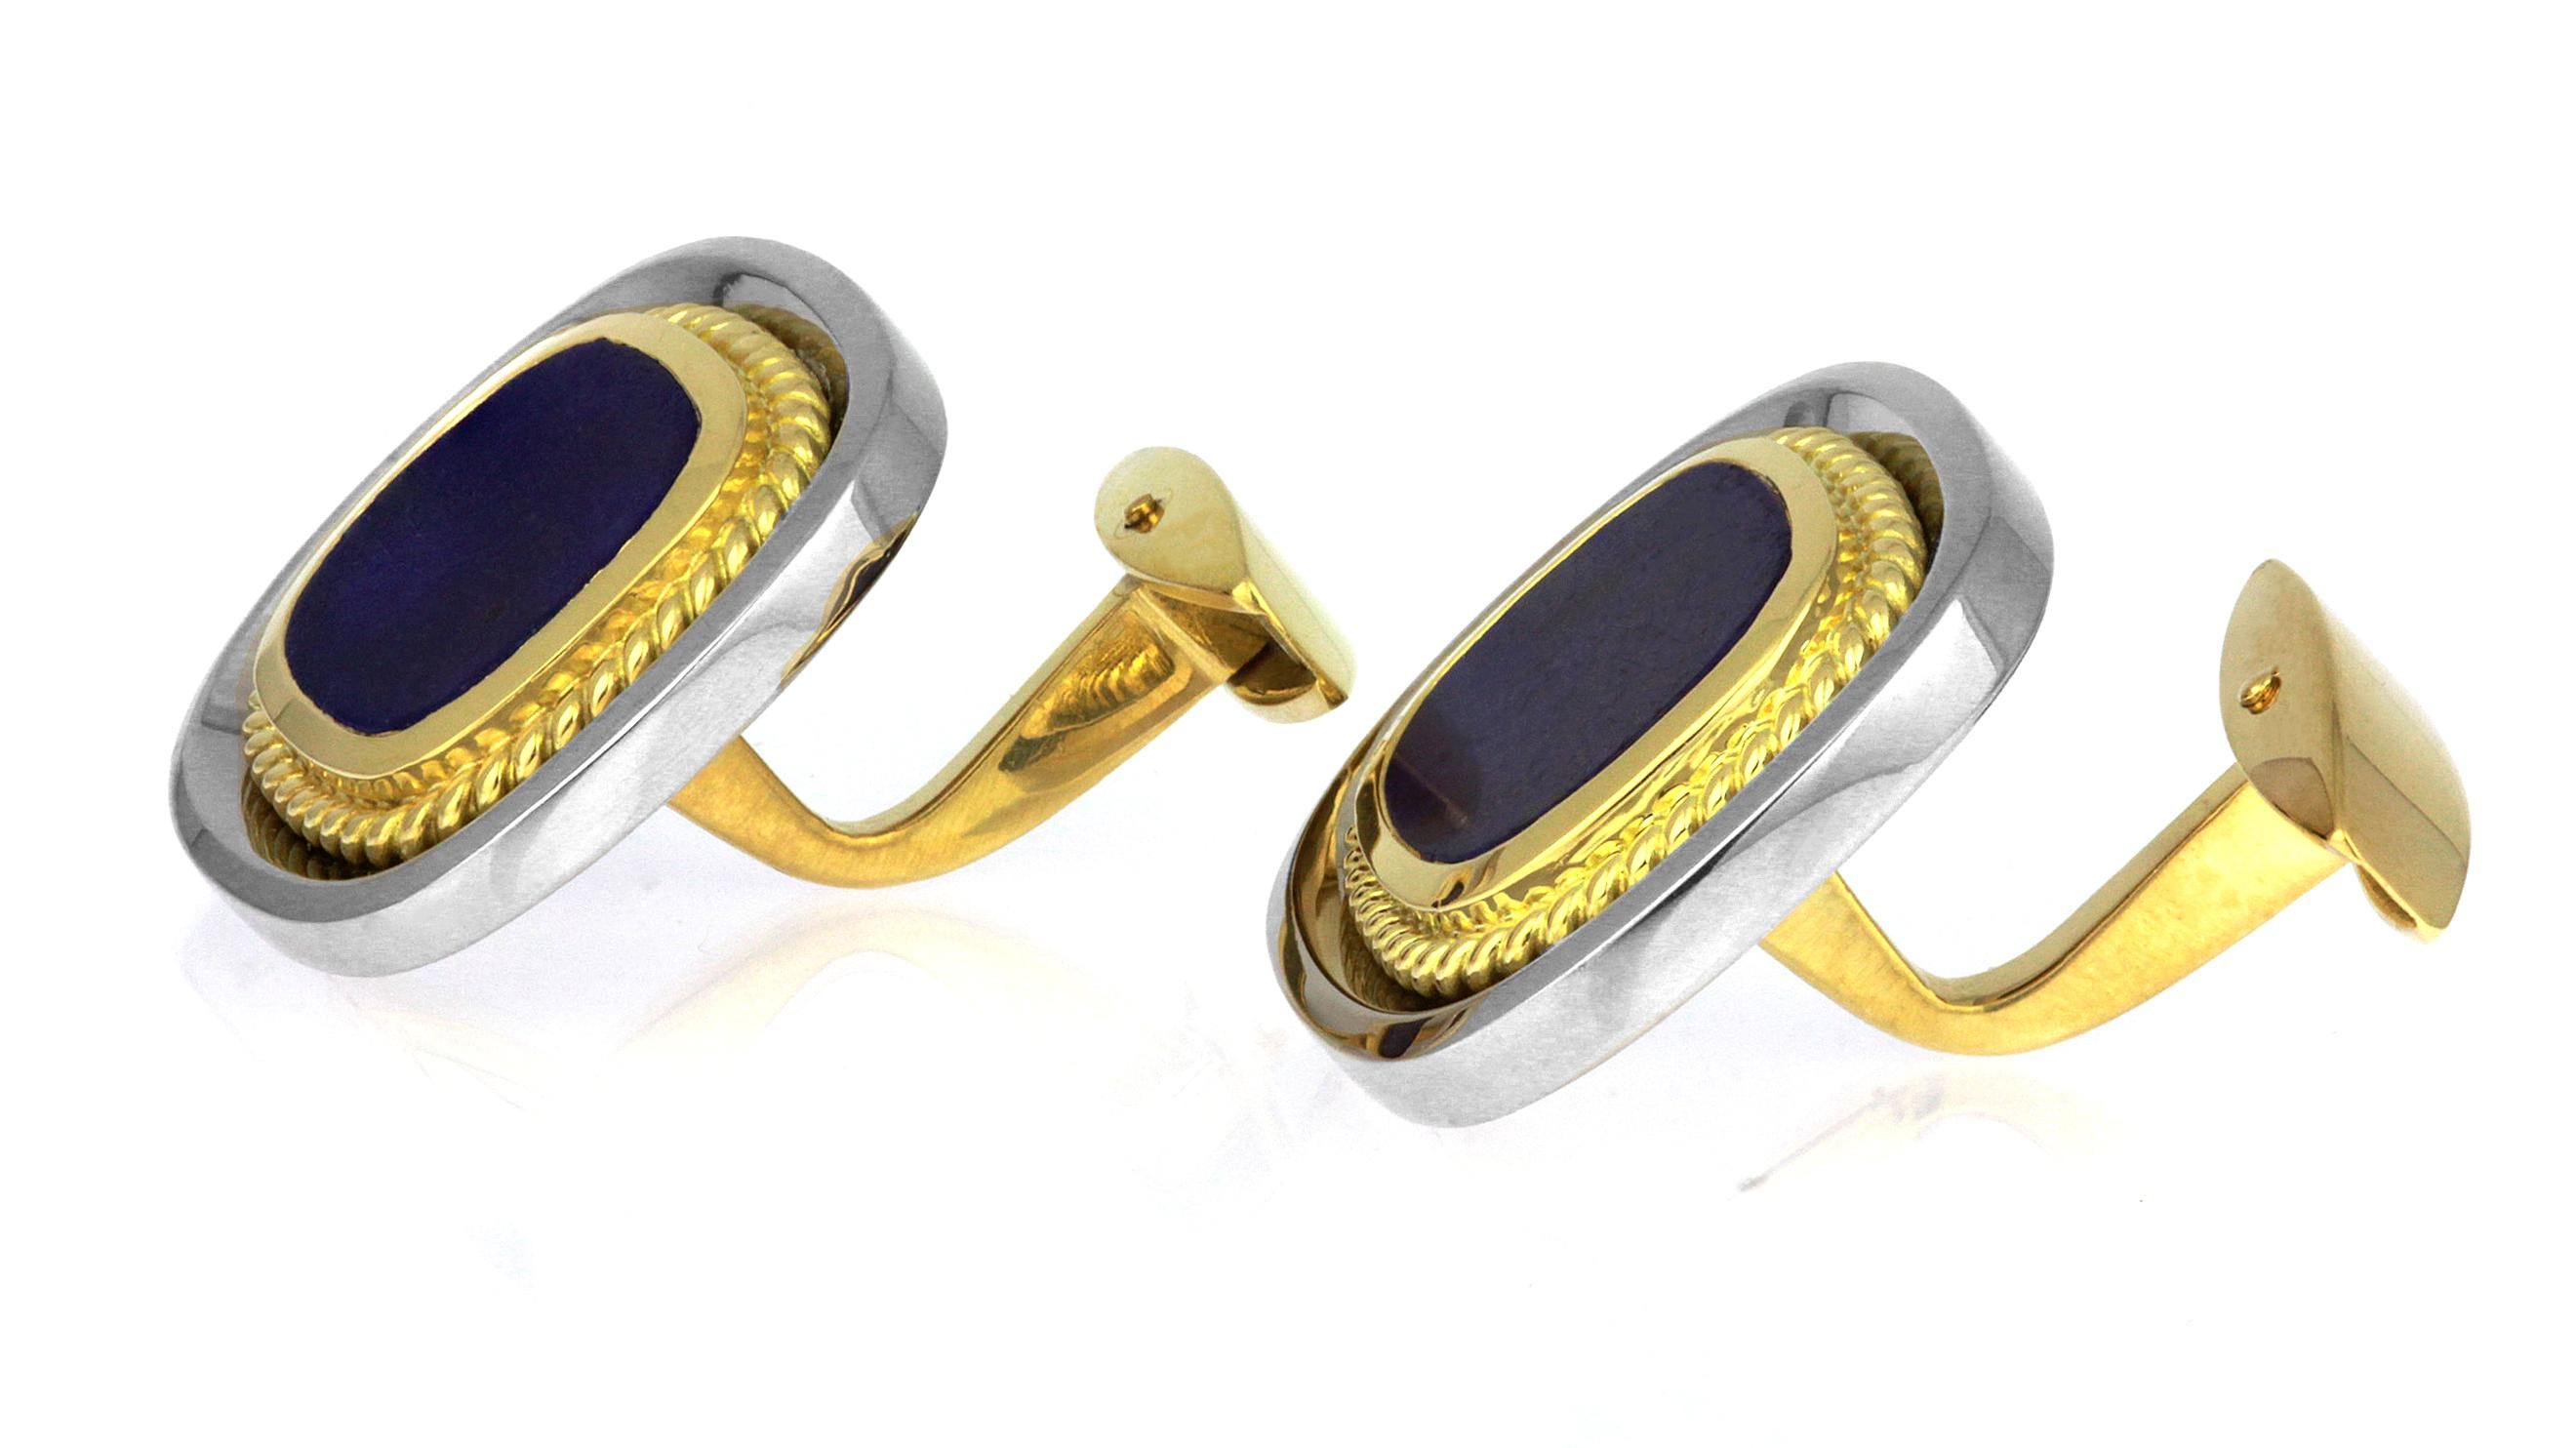 Vintage Cufflinks with Lapis Lazuli in Bimetal 18 Carat White & Yellow Gold In Excellent Condition For Sale In London, GB